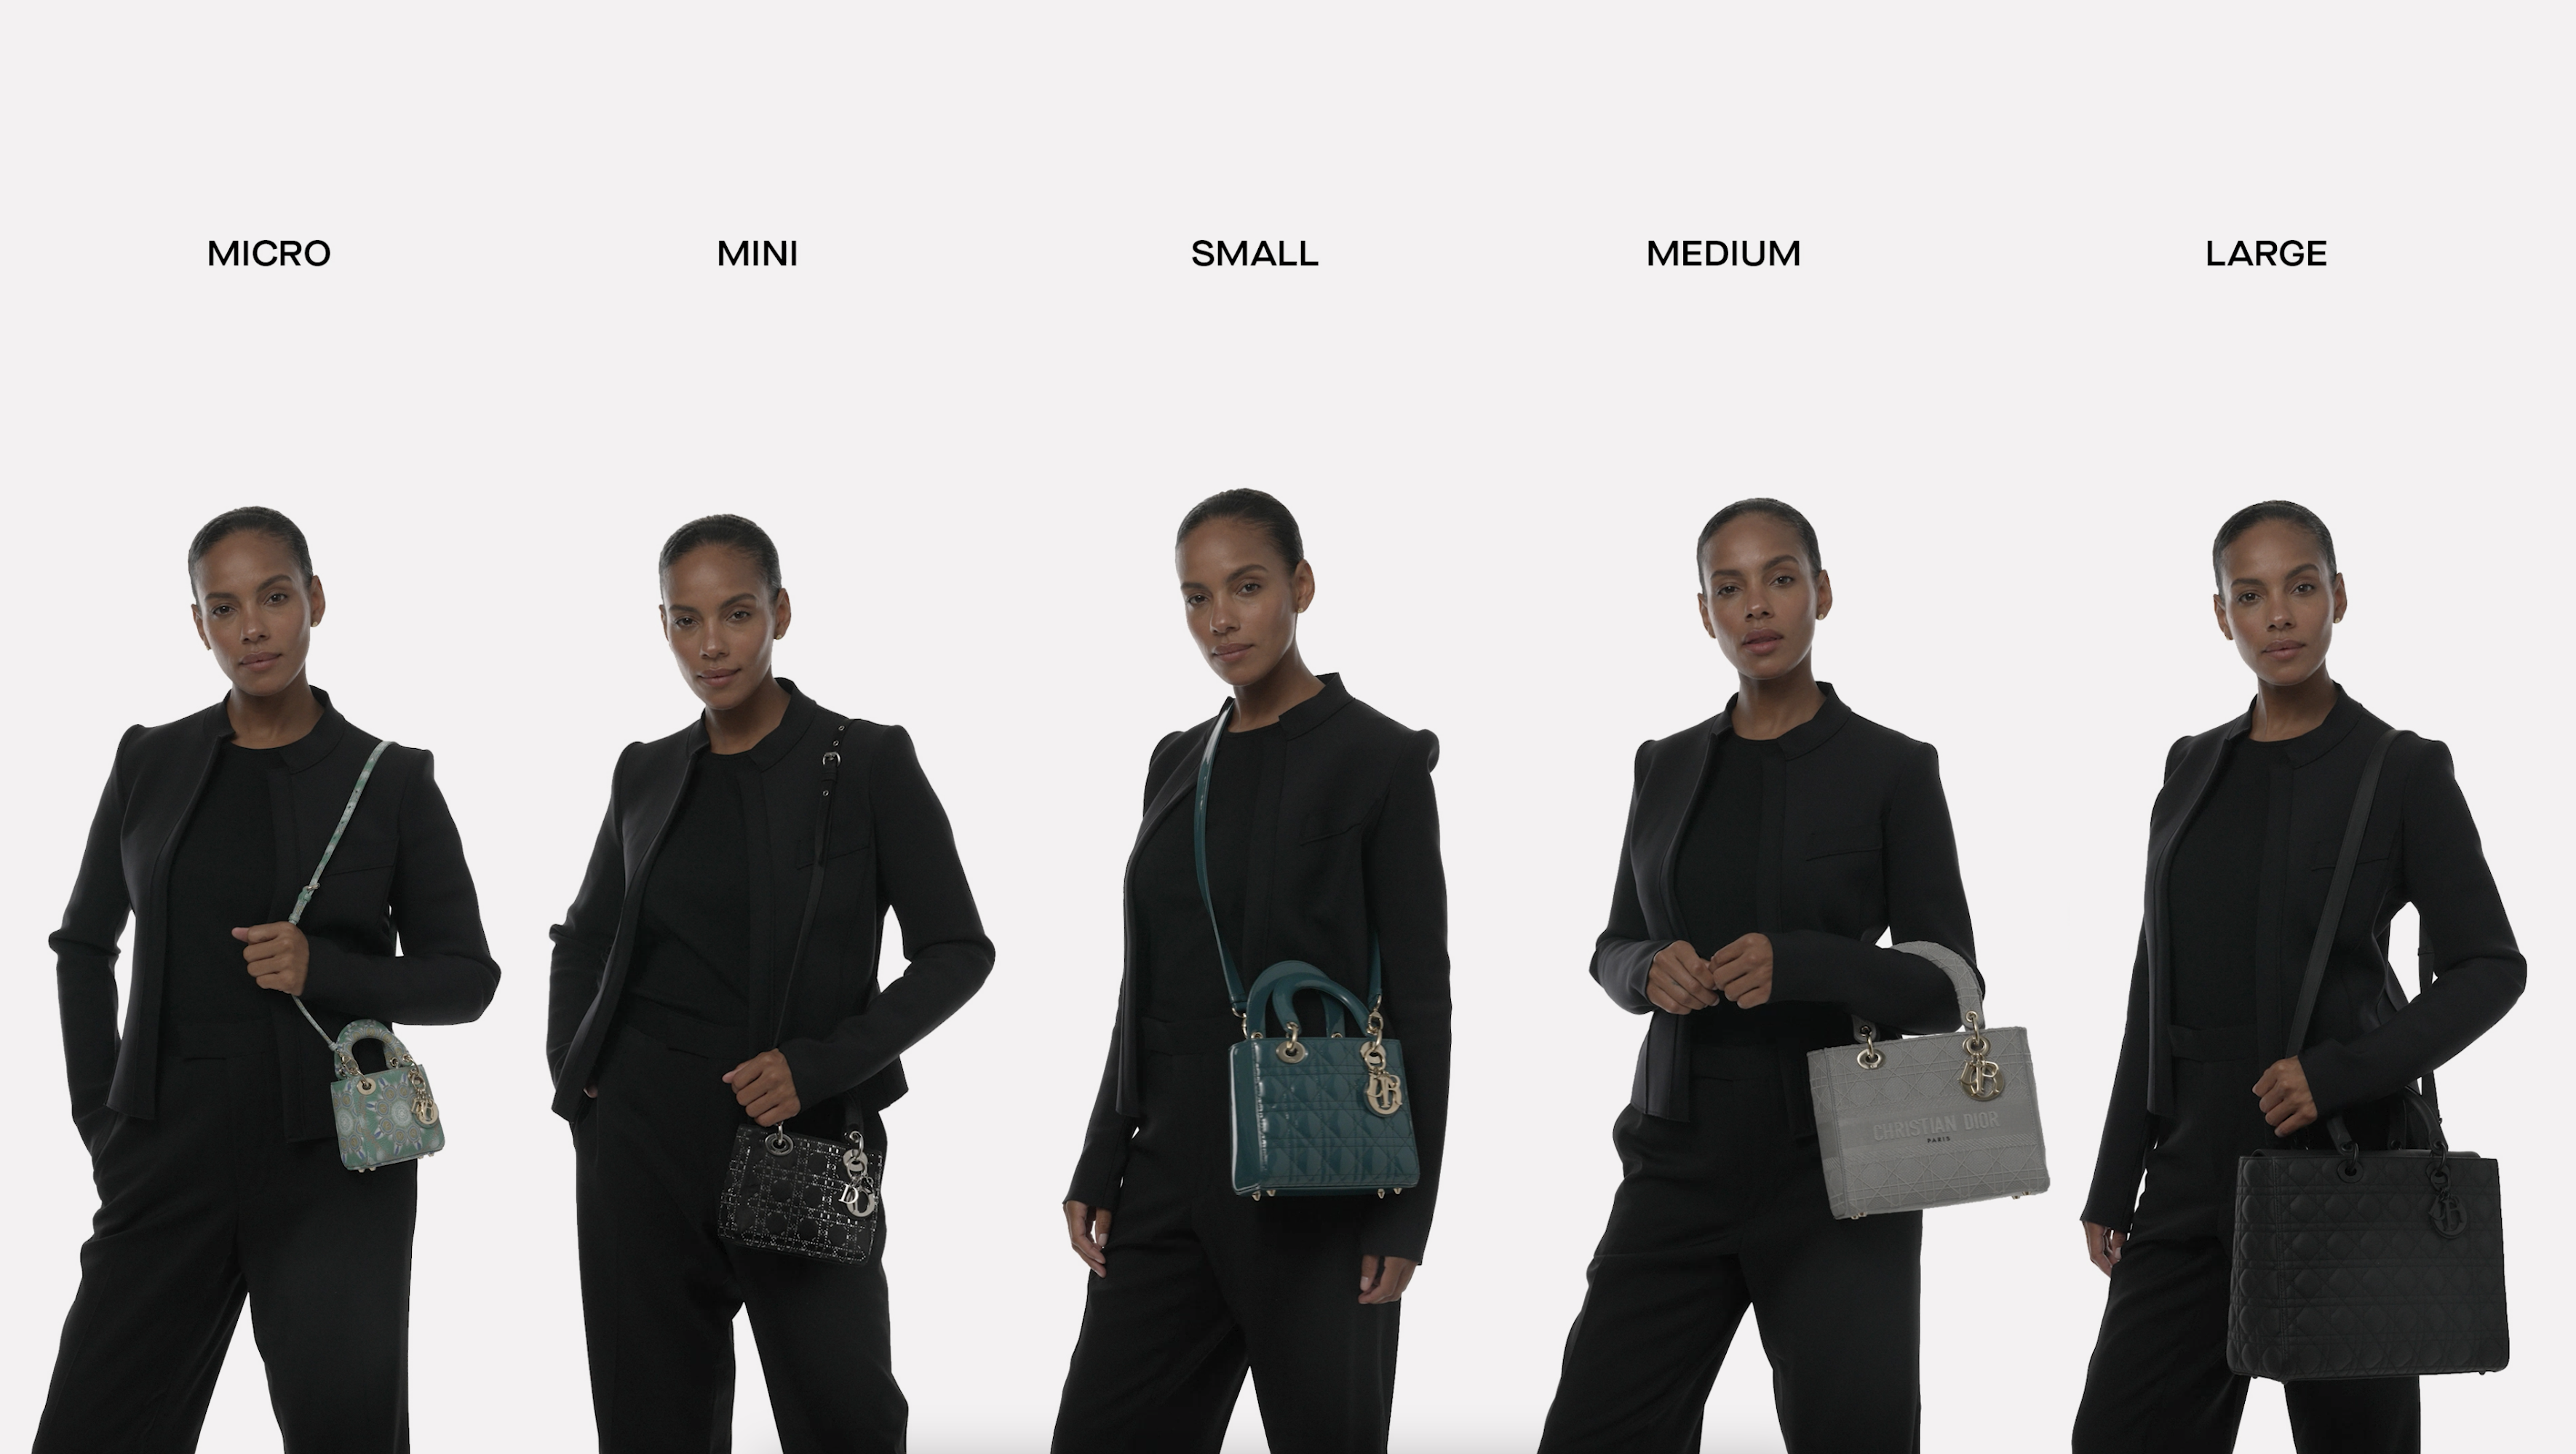 The Size Guide: Lady Dior - The Vault